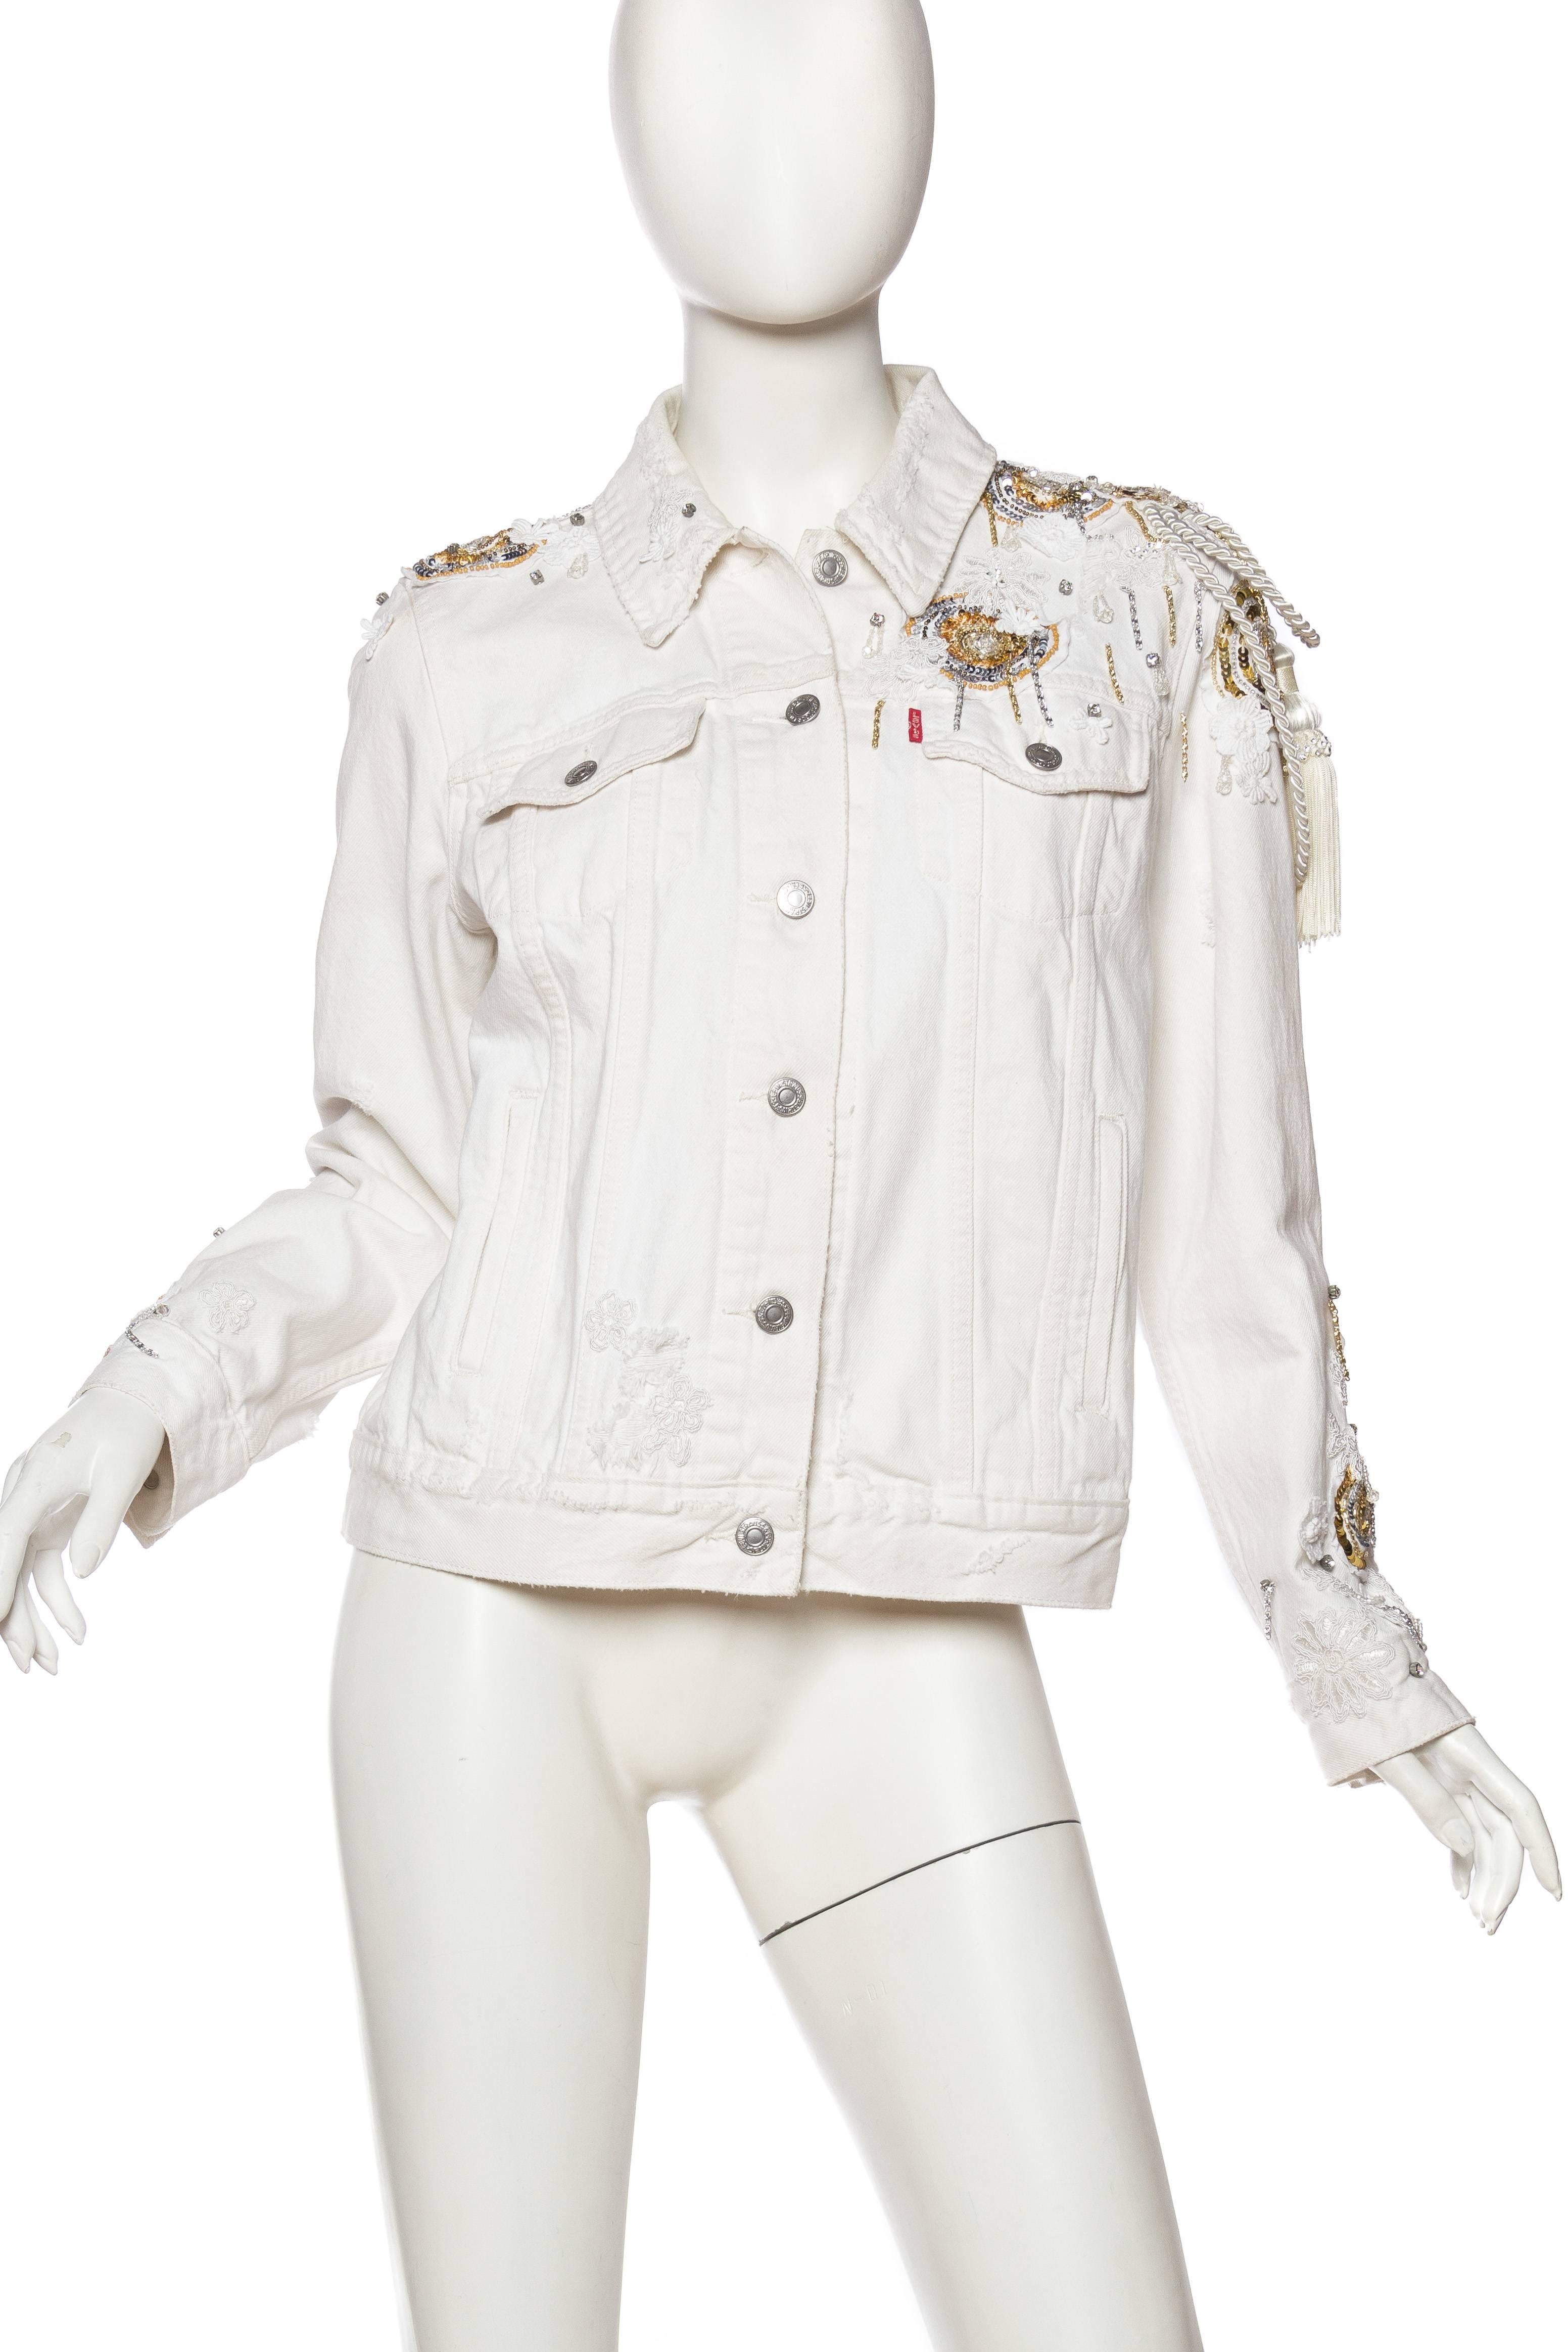 Gray MORPHEW COLLECTION X UNLEASHED White Cotton Denim Gold Sequin, Lace & Crystal E